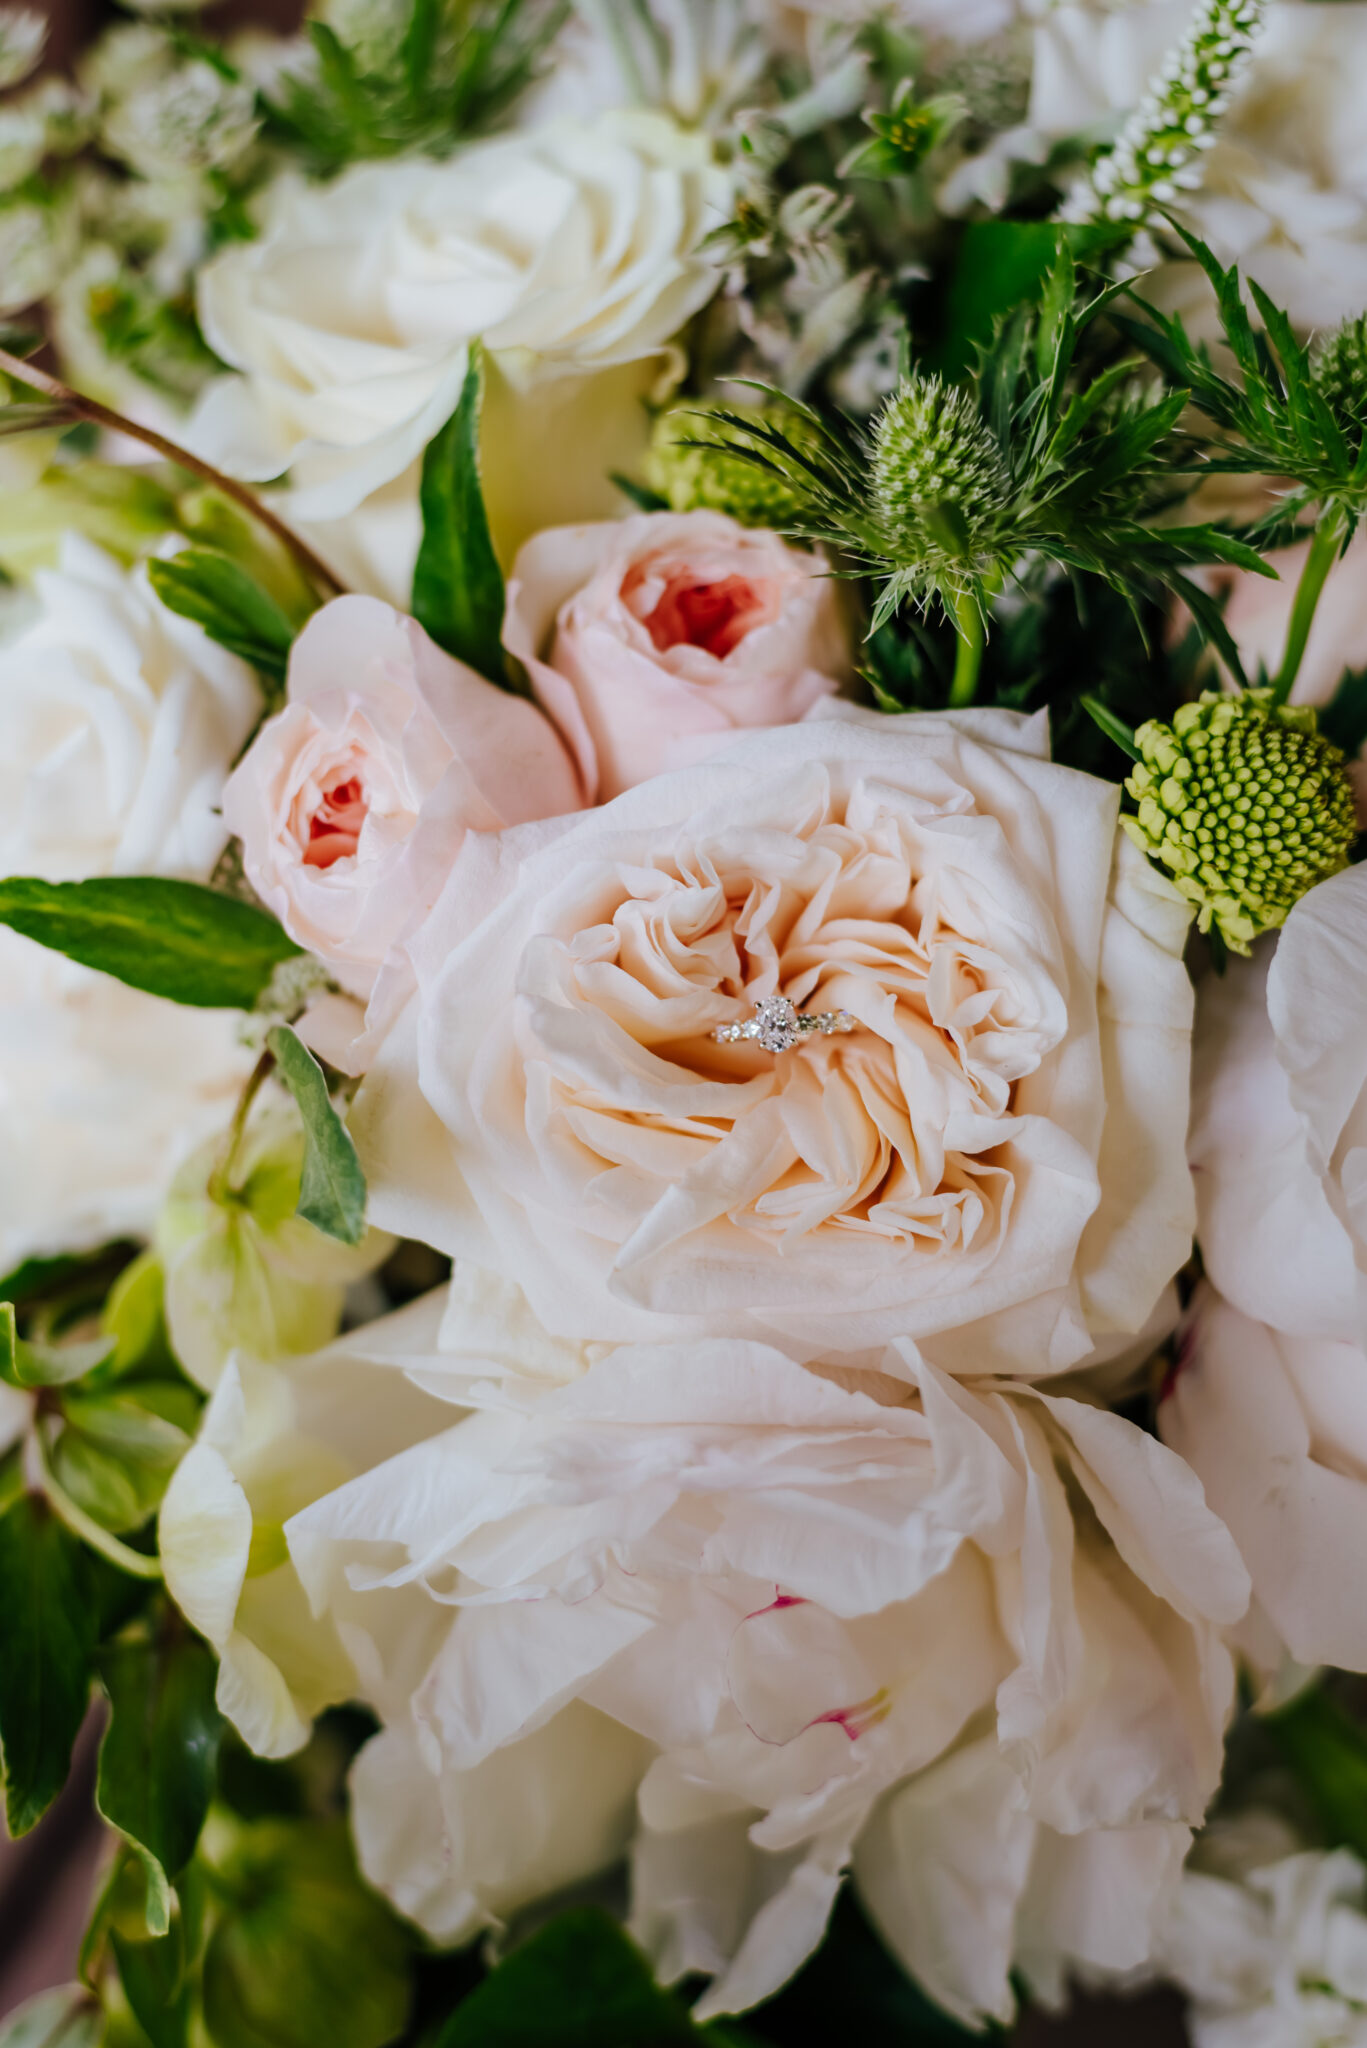 An engagement ring nestles in a blush pink peony bouquet